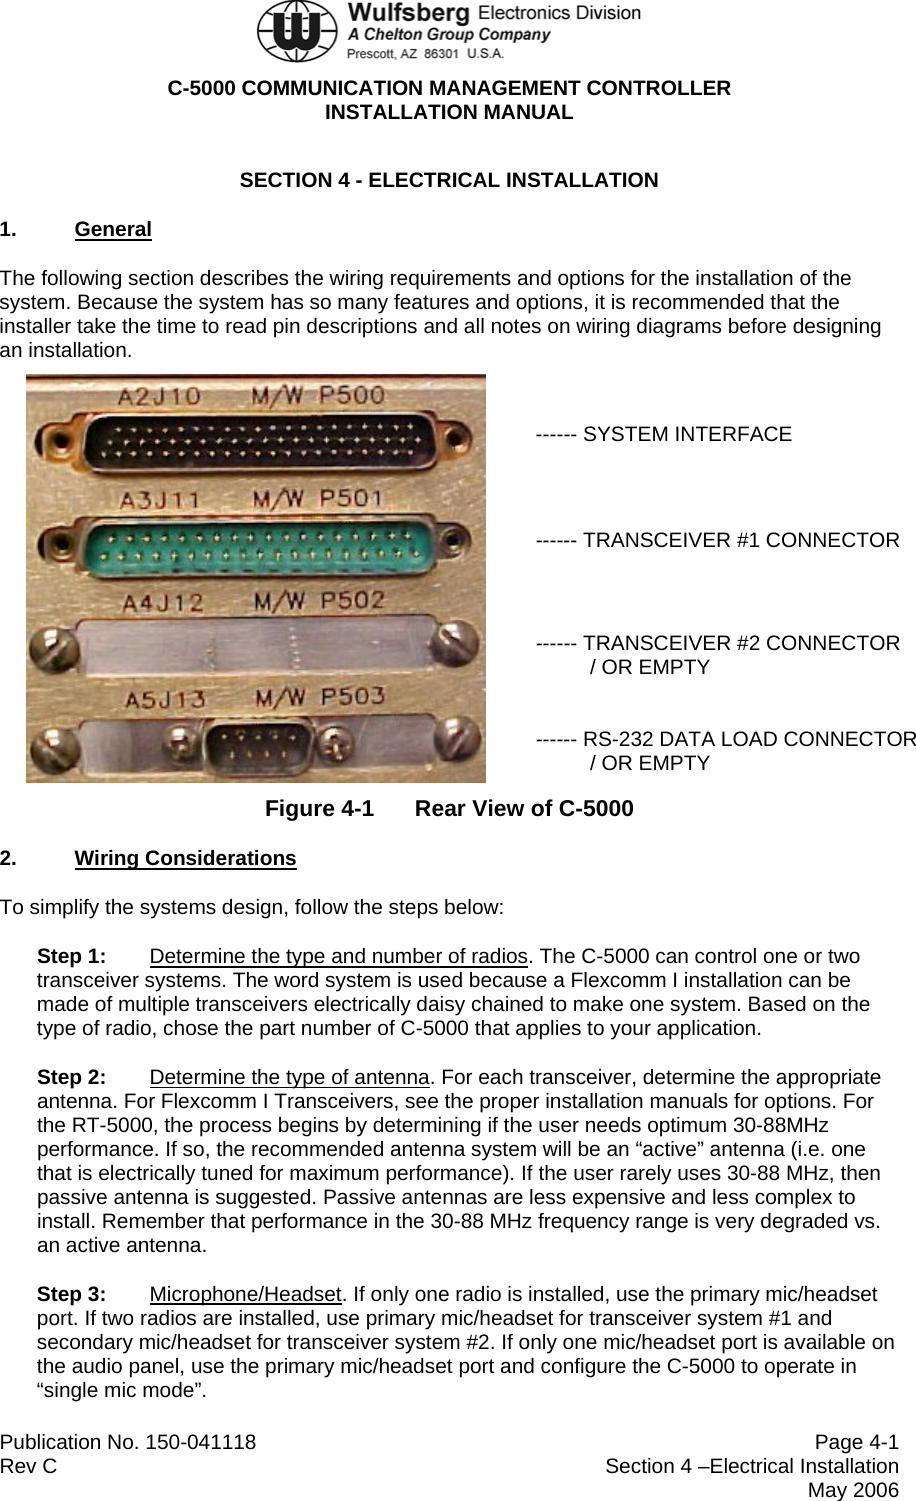  C-5000 COMMUNICATION MANAGEMENT CONTROLLER INSTALLATION MANUAL  Publication No. 150-041118  Page 4-1 Rev C  Section 4 –Electrical Installation  May 2006 SECTION 4 - ELECTRICAL INSTALLATION 1.  General The following section describes the wiring requirements and options for the installation of the system. Because the system has so many features and options, it is recommended that the installer take the time to read pin descriptions and all notes on wiring diagrams before designing an installation.    ------ SYSTEM INTERFACE    ------ TRANSCEIVER #1 CONNECTOR     ------ TRANSCEIVER #2 CONNECTOR    / OR EMPTY   ------ RS-232 DATA LOAD CONNECTOR   / OR EMPTY Figure 4-1  Rear View of C-5000 2.  Wiring Considerations To simplify the systems design, follow the steps below: Step 1: Determine the type and number of radios. The C-5000 can control one or two transceiver systems. The word system is used because a Flexcomm I installation can be made of multiple transceivers electrically daisy chained to make one system. Based on the type of radio, chose the part number of C-5000 that applies to your application. Step 2: Determine the type of antenna. For each transceiver, determine the appropriate antenna. For Flexcomm I Transceivers, see the proper installation manuals for options. For the RT-5000, the process begins by determining if the user needs optimum 30-88MHz performance. If so, the recommended antenna system will be an “active” antenna (i.e. one that is electrically tuned for maximum performance). If the user rarely uses 30-88 MHz, then passive antenna is suggested. Passive antennas are less expensive and less complex to install. Remember that performance in the 30-88 MHz frequency range is very degraded vs. an active antenna. Step 3: Microphone/Headset. If only one radio is installed, use the primary mic/headset port. If two radios are installed, use primary mic/headset for transceiver system #1 and secondary mic/headset for transceiver system #2. If only one mic/headset port is available on the audio panel, use the primary mic/headset port and configure the C-5000 to operate in “single mic mode”. 